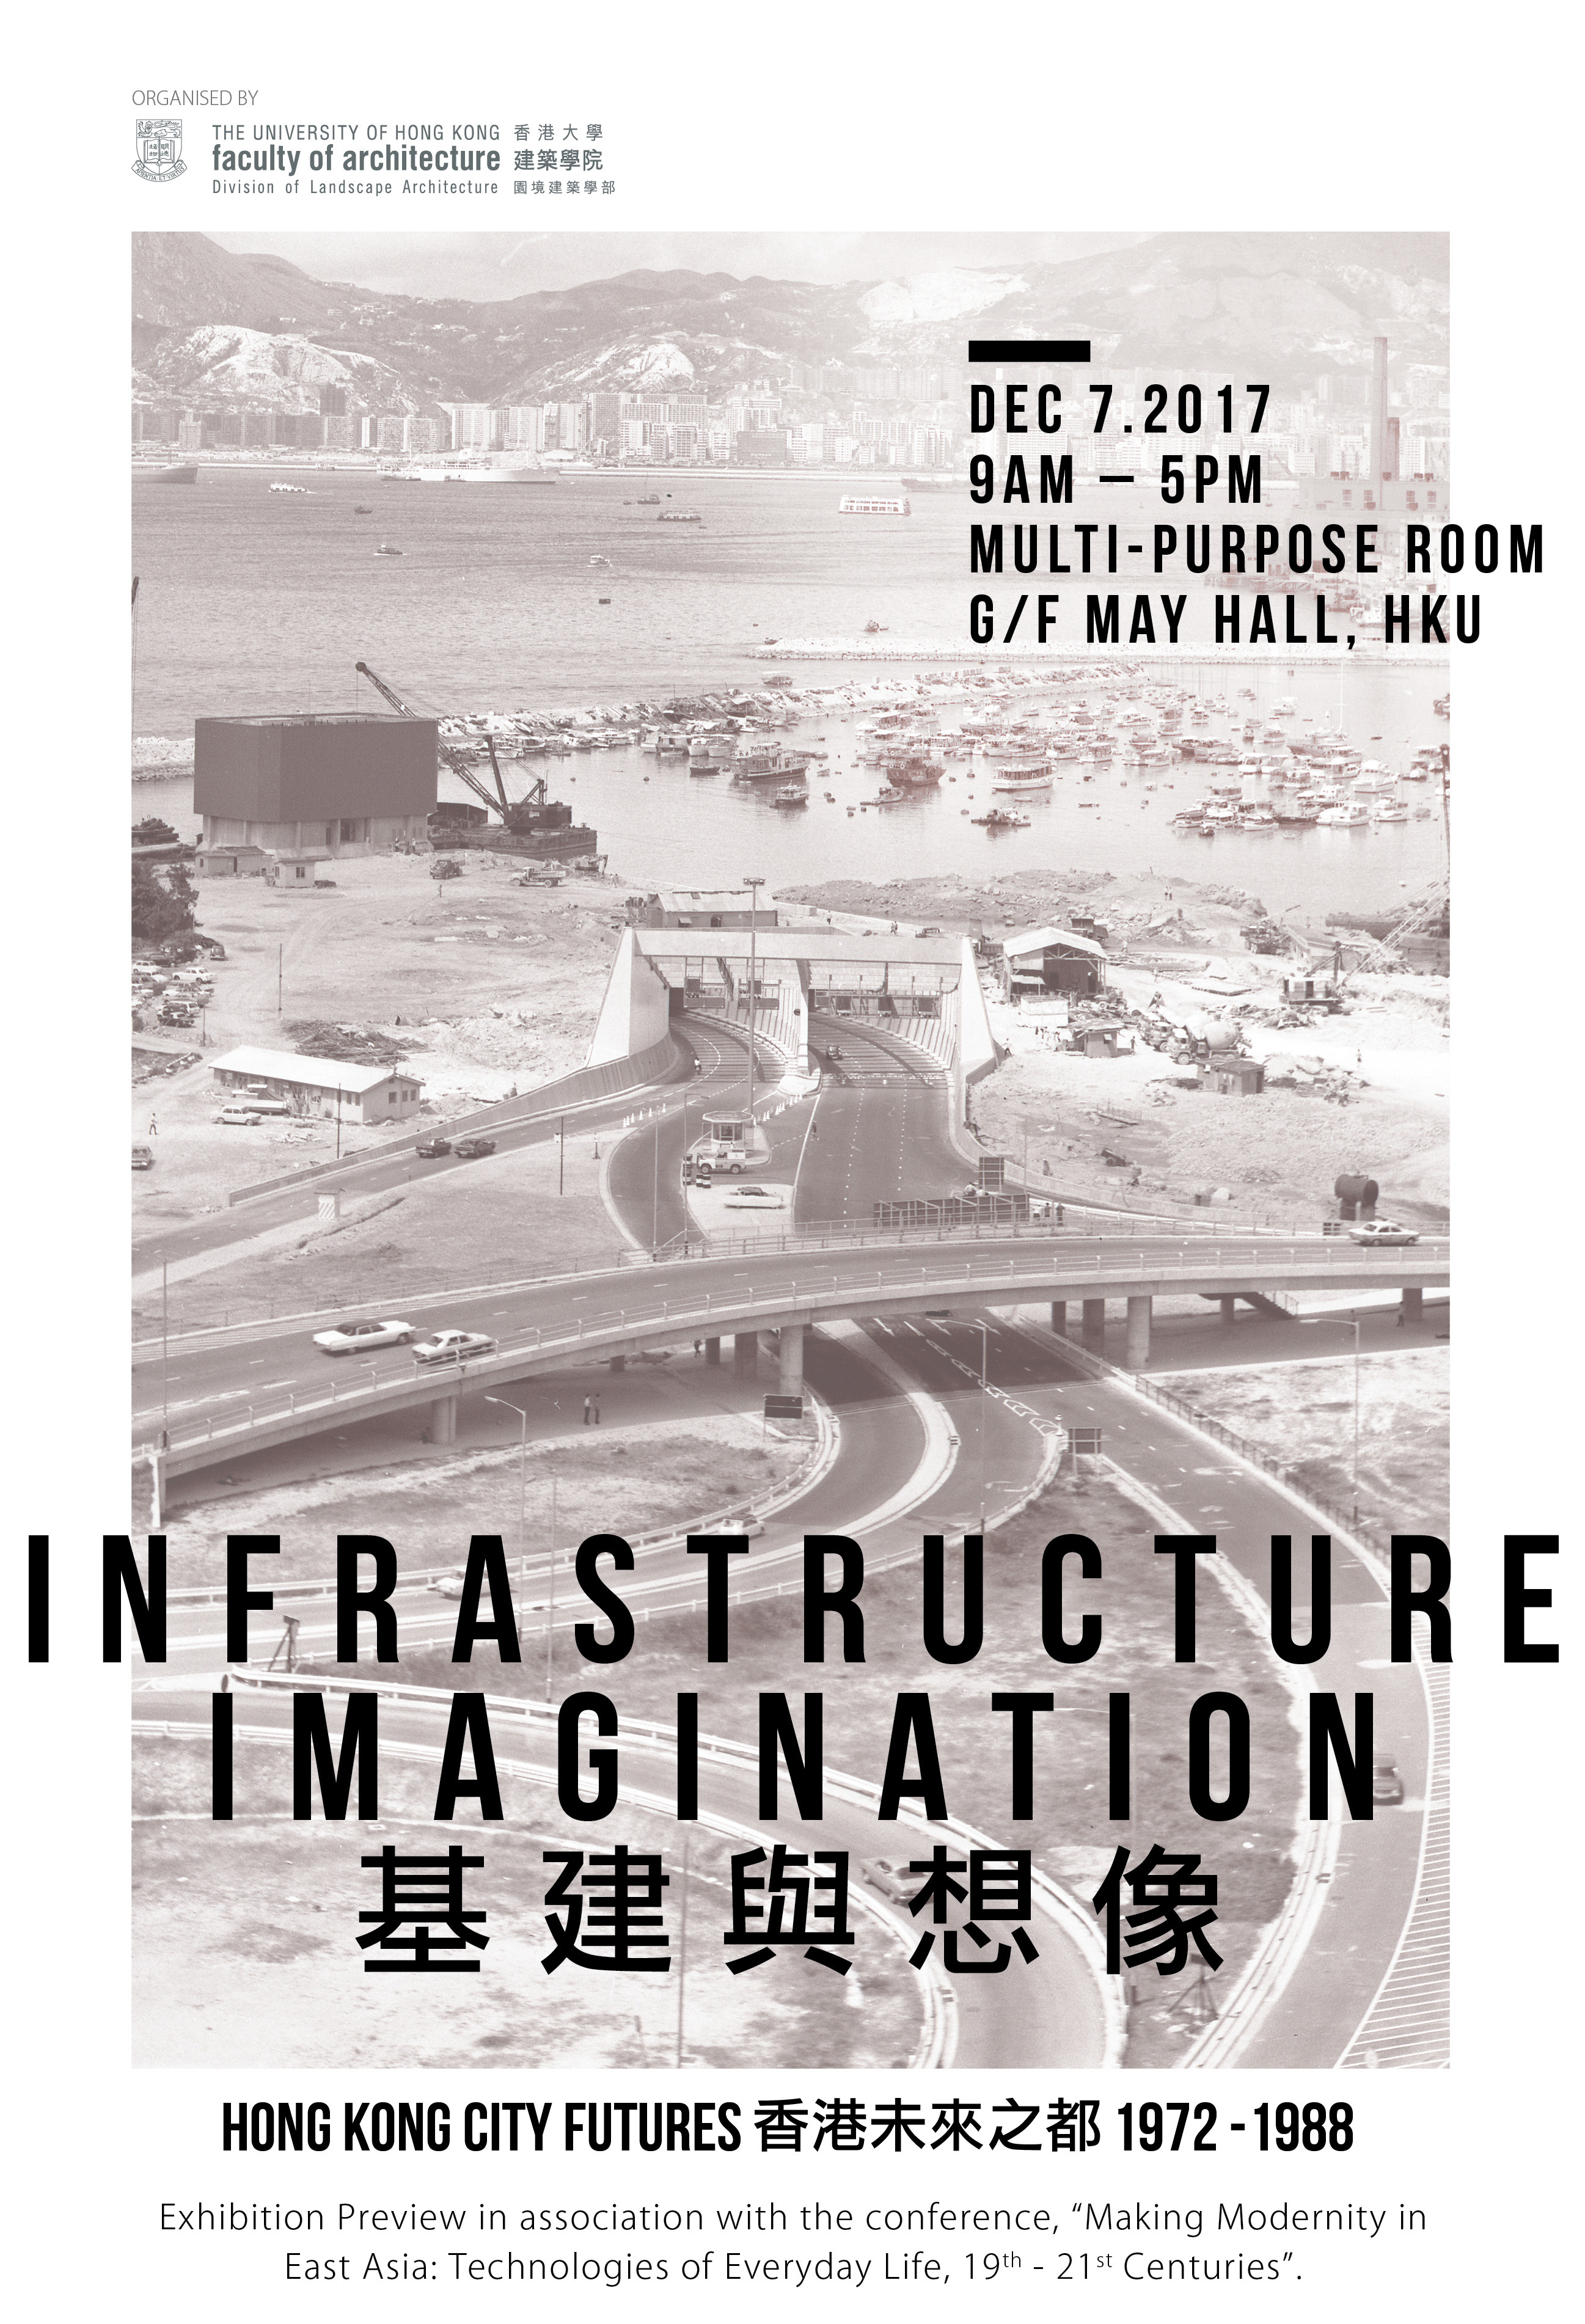 Exhibition Preview: Infrastructure Imagination, Hong Kong City Futures 1972-1988